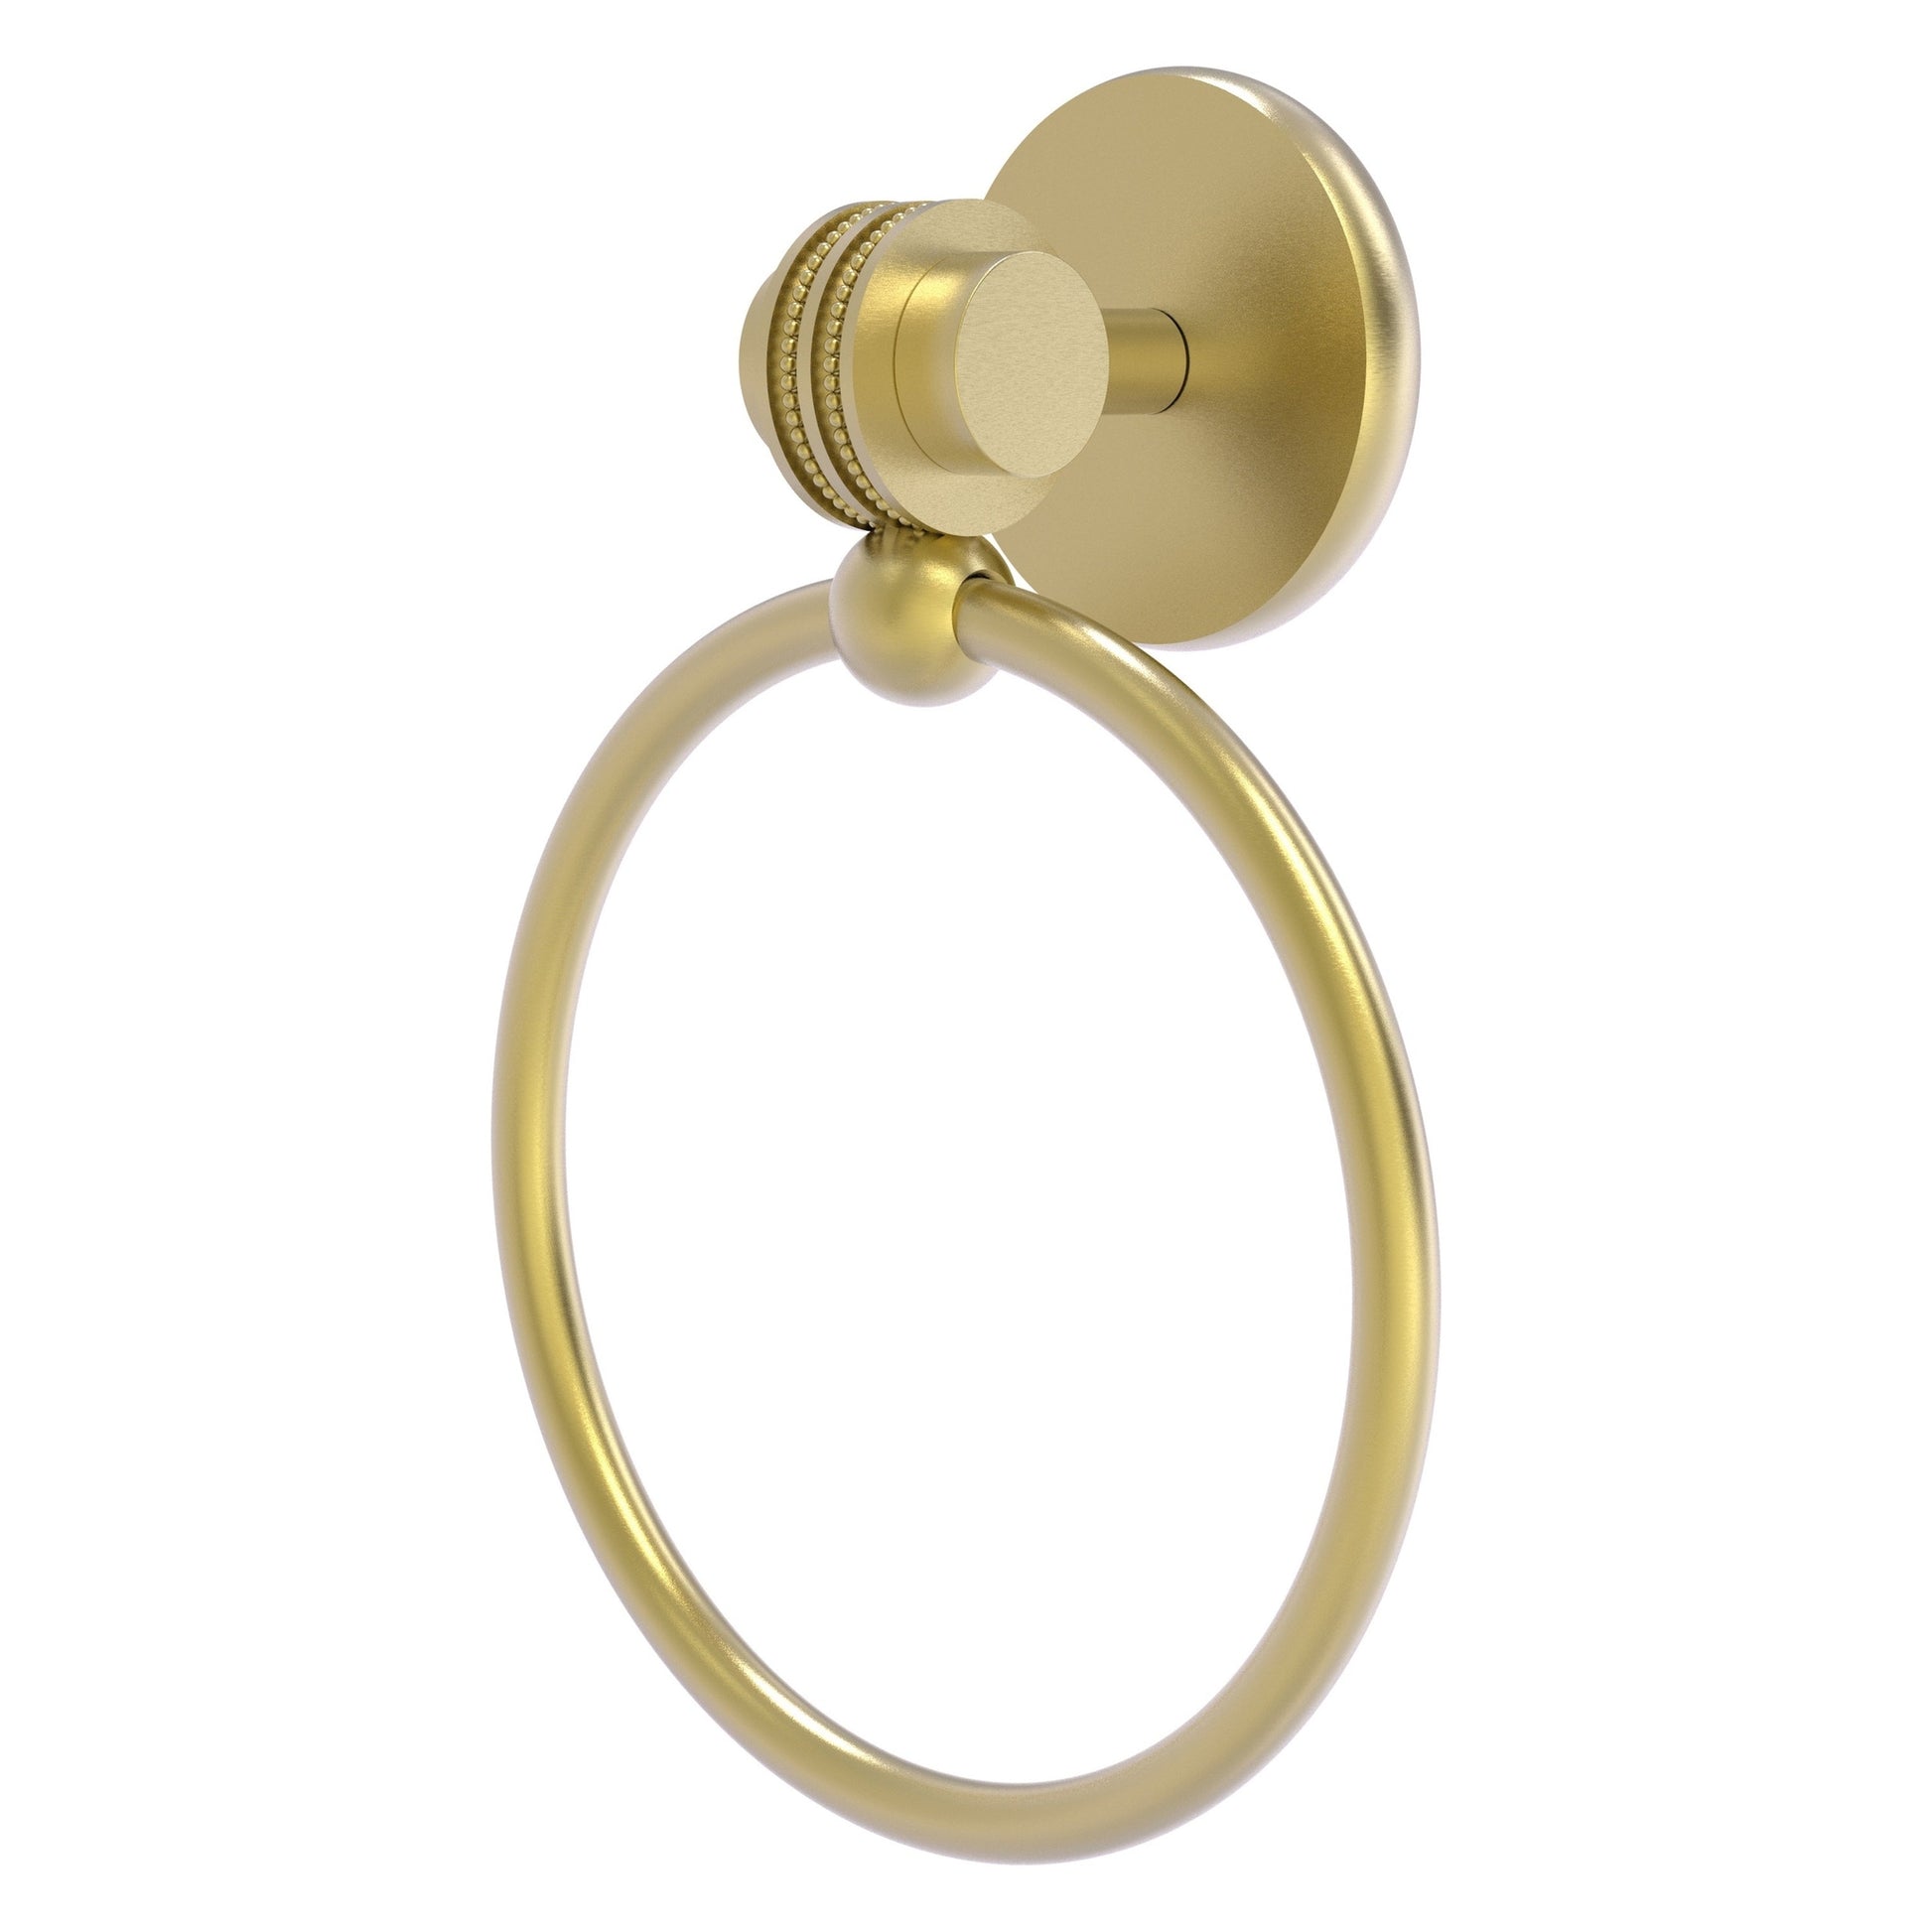 Allied Brass Satellite Orbit Two 6" x 3.5" Satin Brass Solid Brass Towel Ring With Dotted Accent